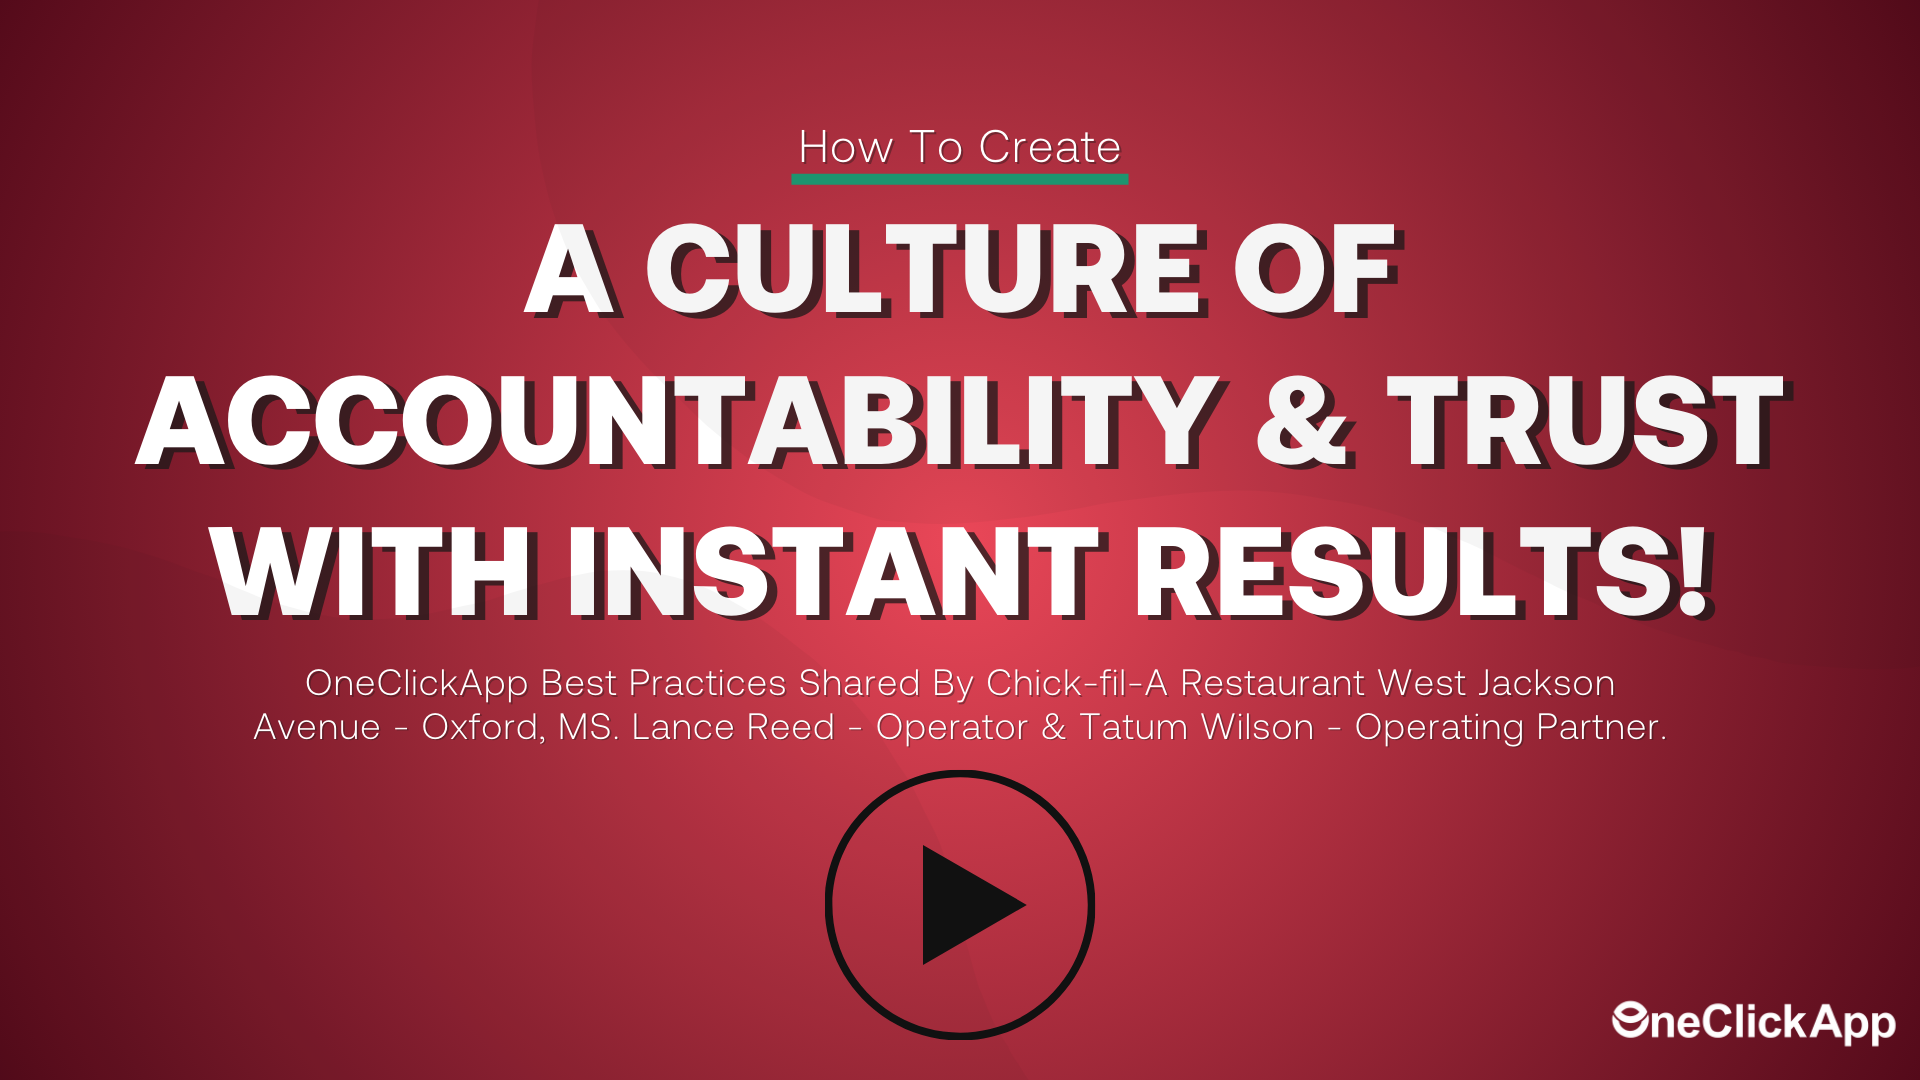 Create A Culture Of Accountability & Trust With OneClickApp for Chick-fil-A Restaurants